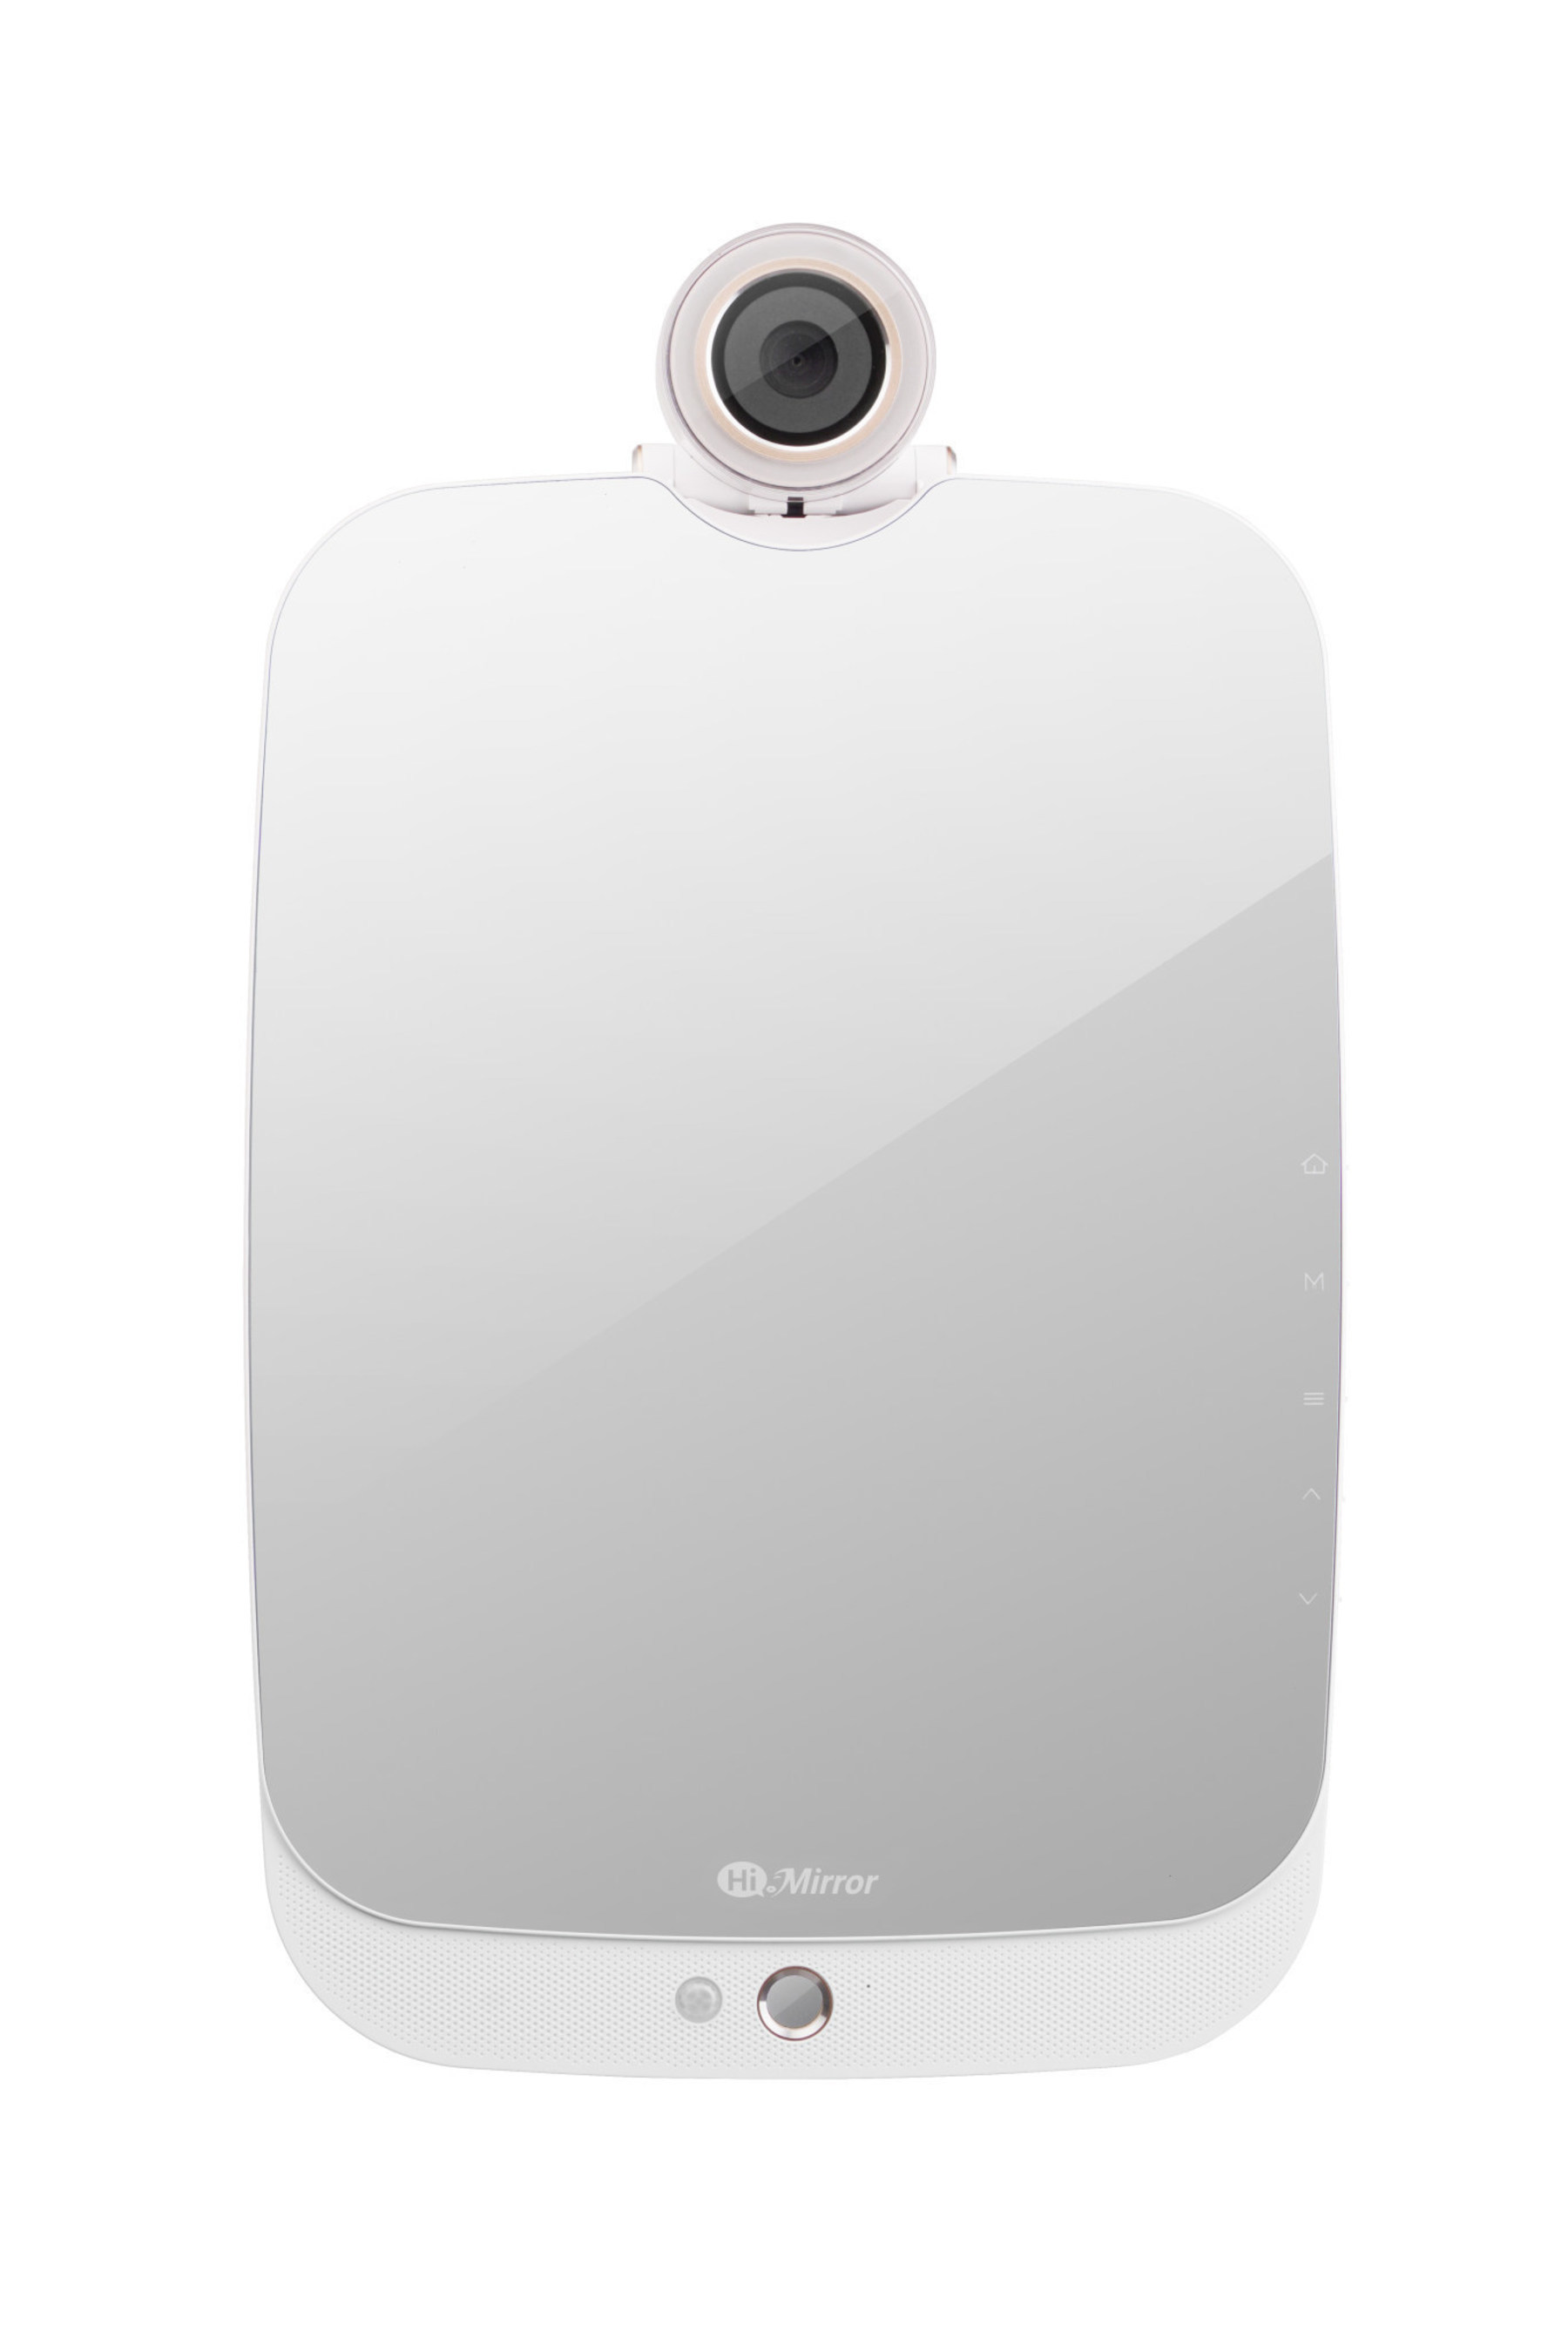 HiMirror Product Photo